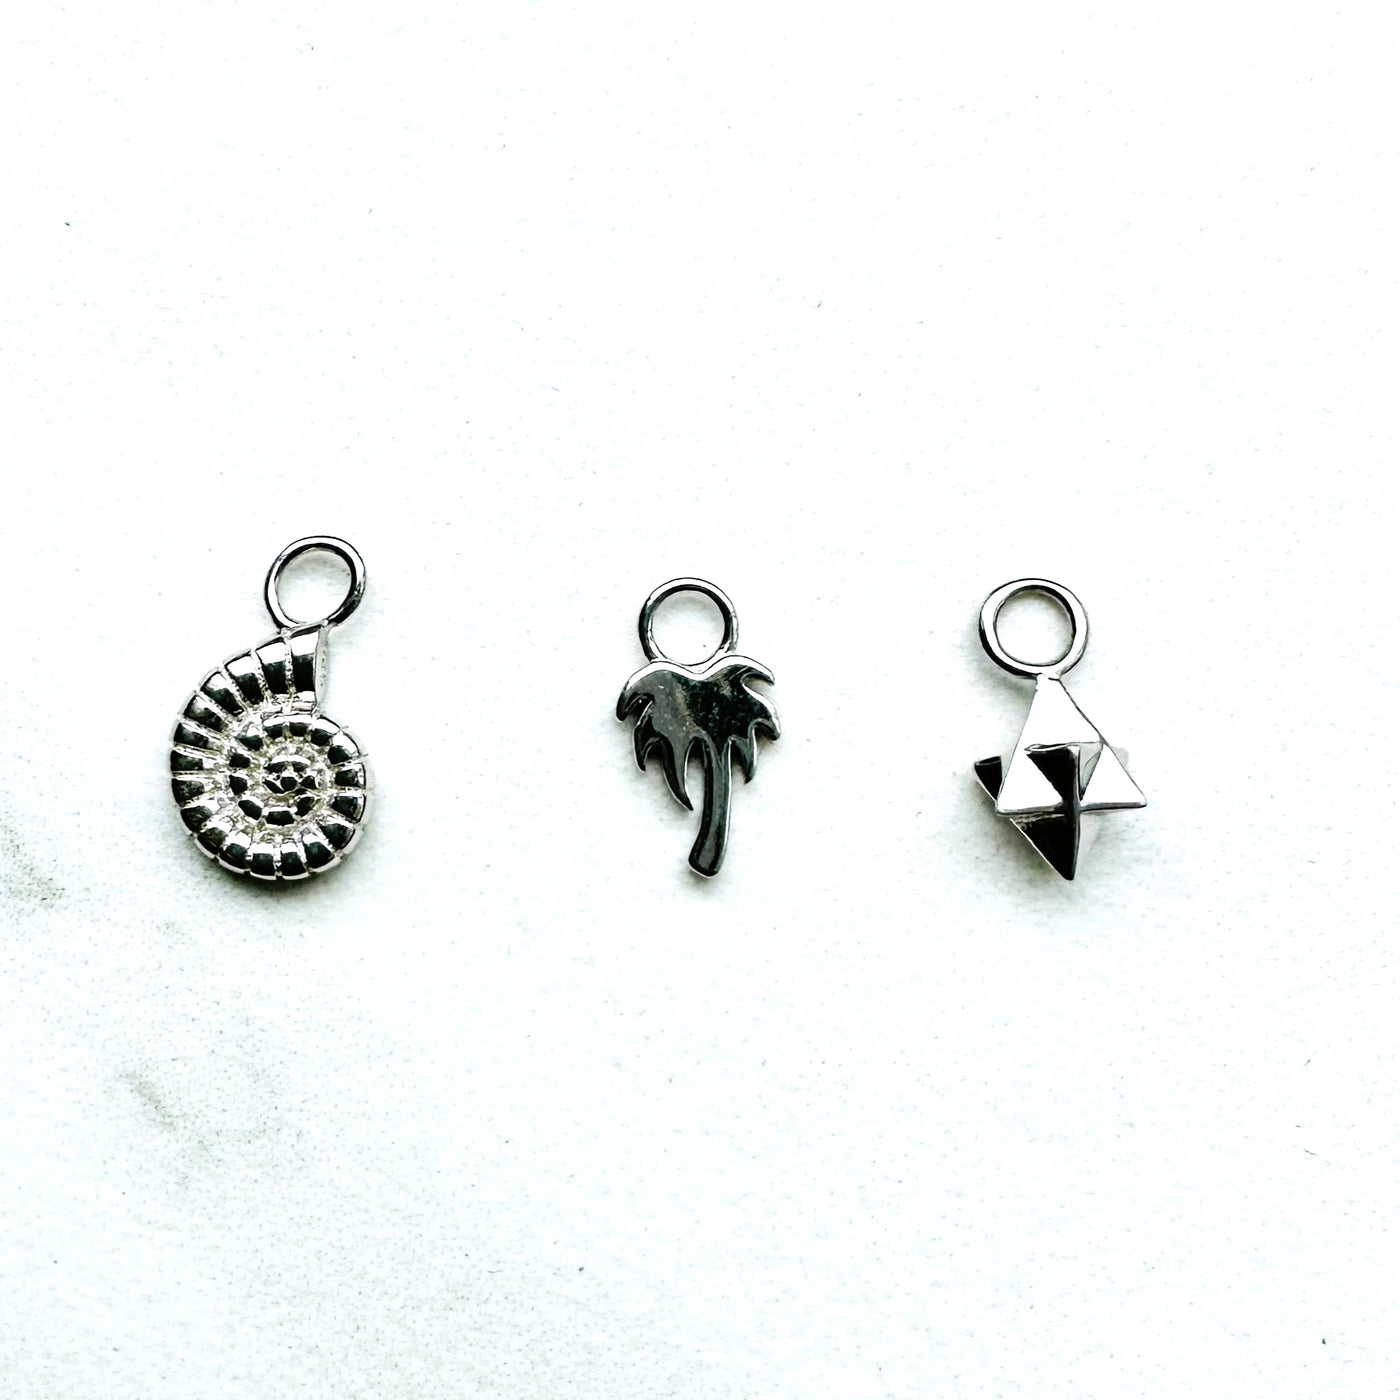 silver ammonite, palm tree and tetrahedron necklace charms